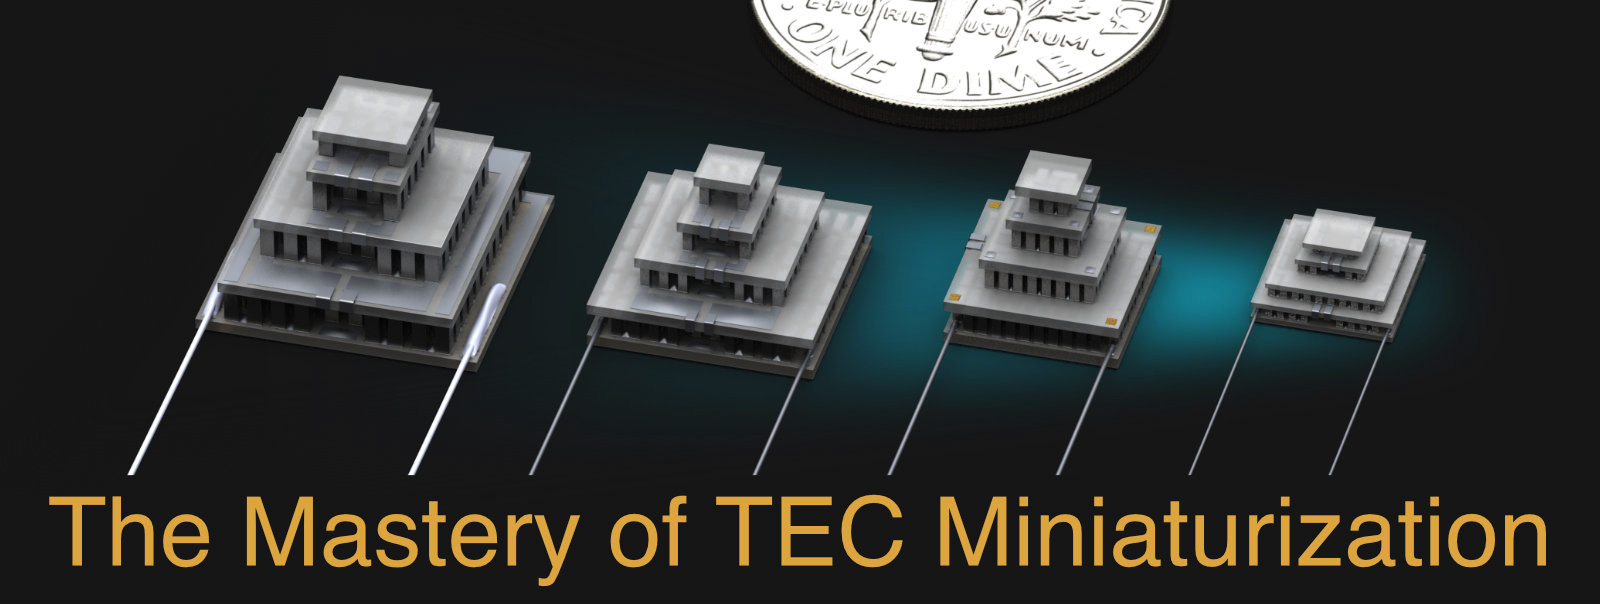 Advanced miniaturization technologies for single and multistage thermoelectric coolers.  Up to 8x smaller size with the same cooling performance.